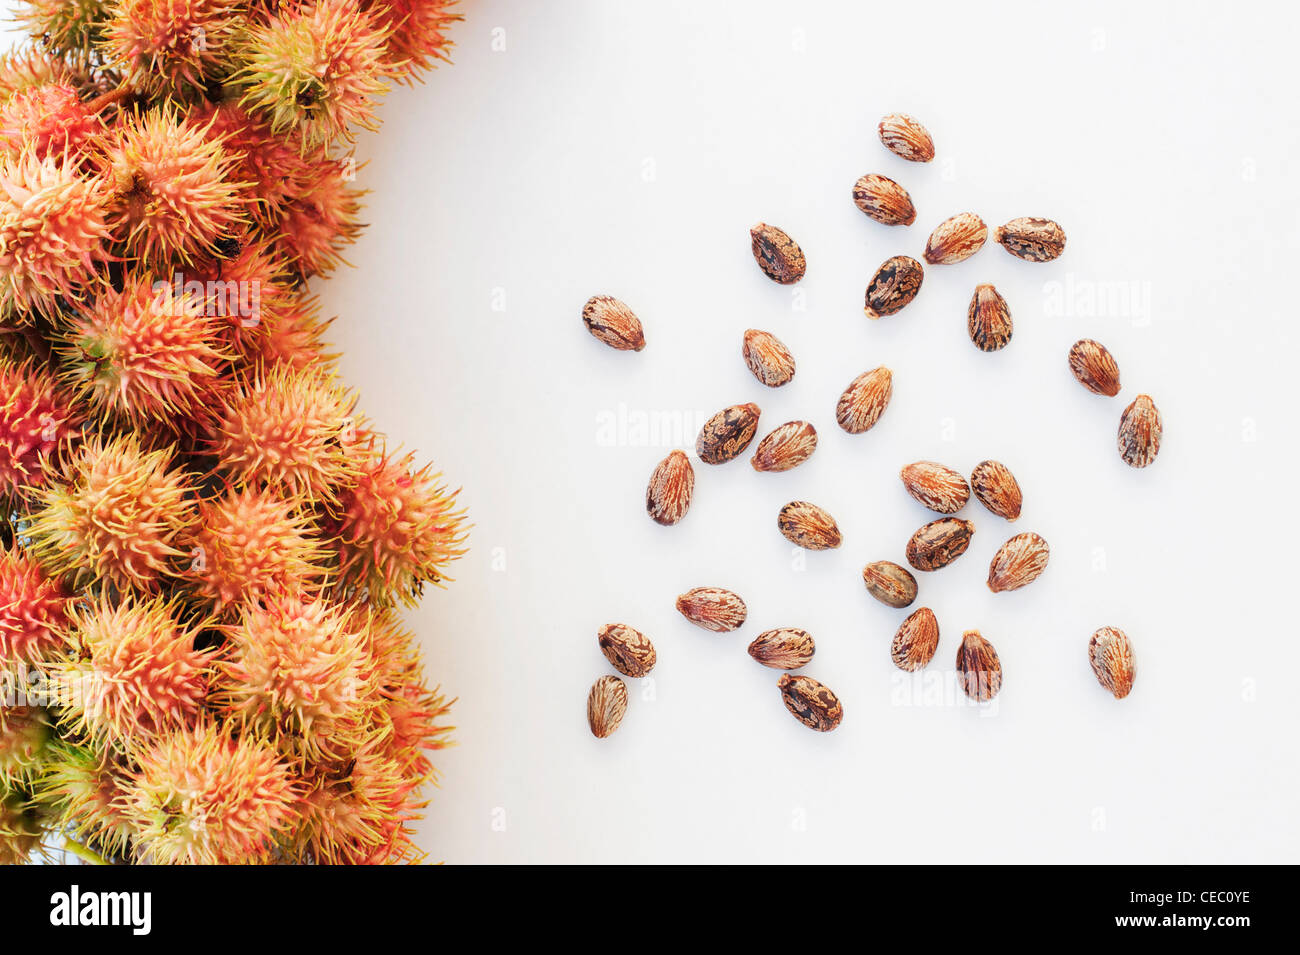 Ricinus communis. Castor oil fruit and seeds on white background Stock Photo